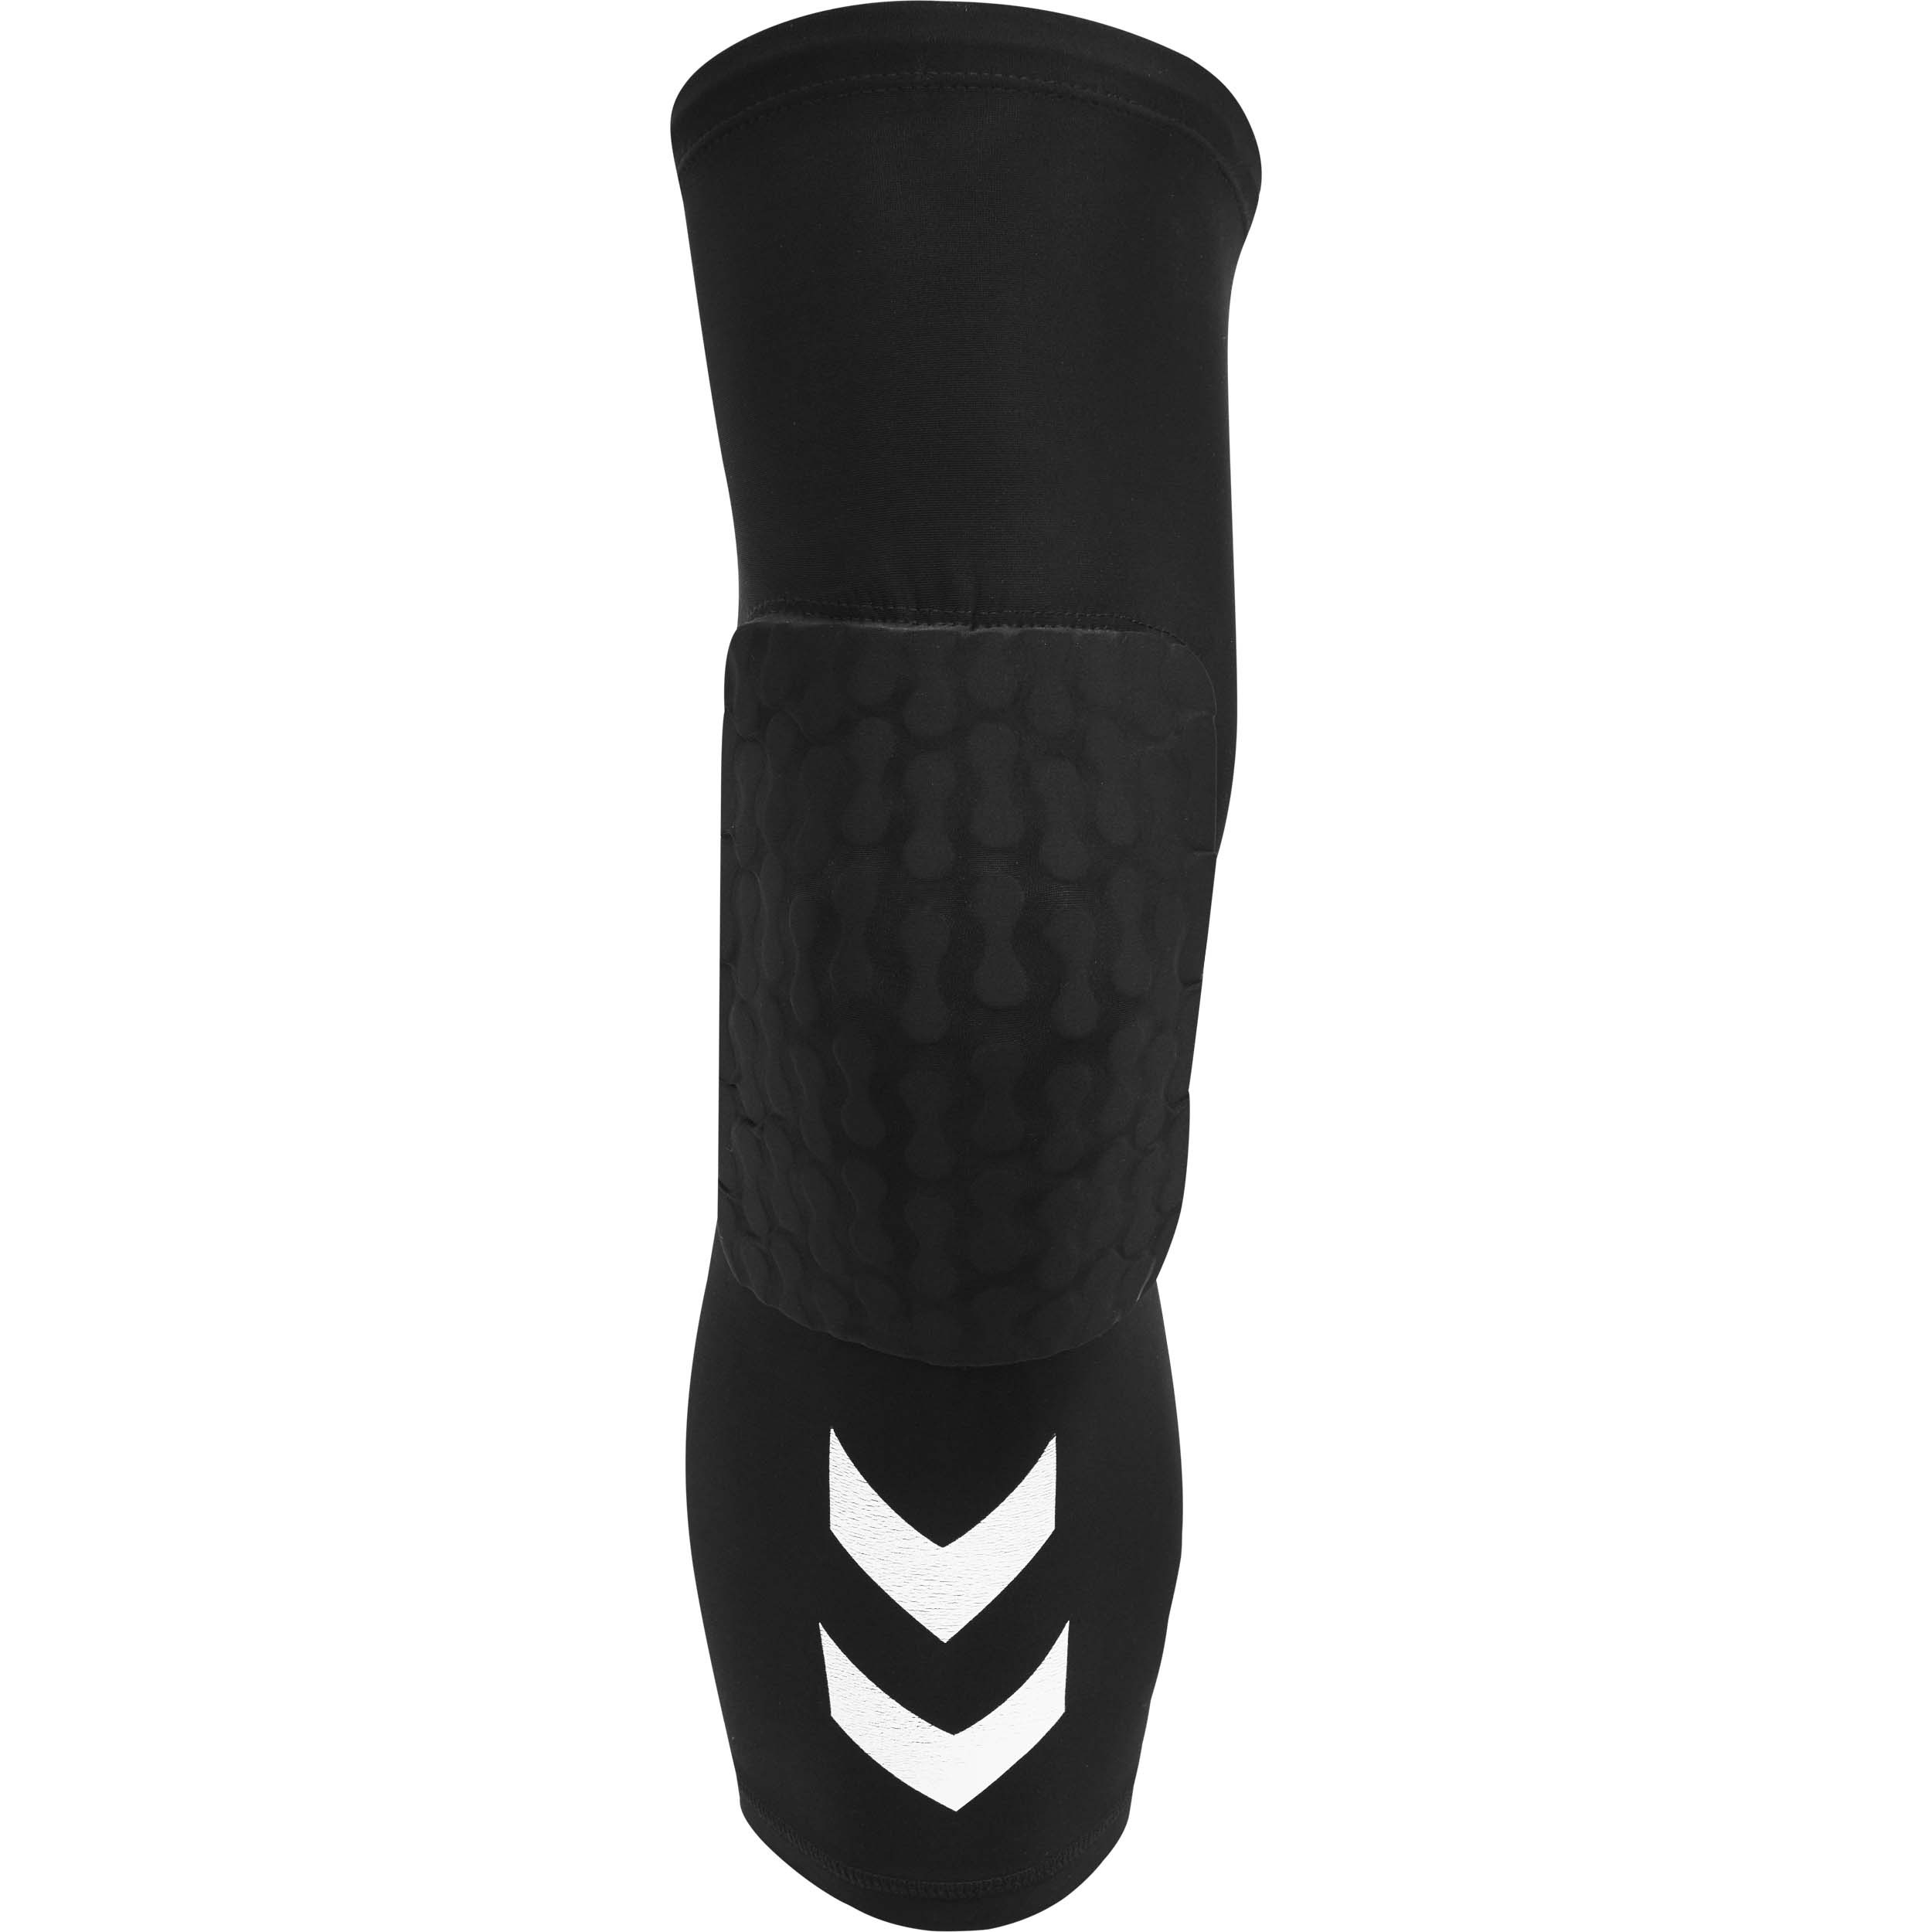 Hummel Protection Knie Long Sleeve